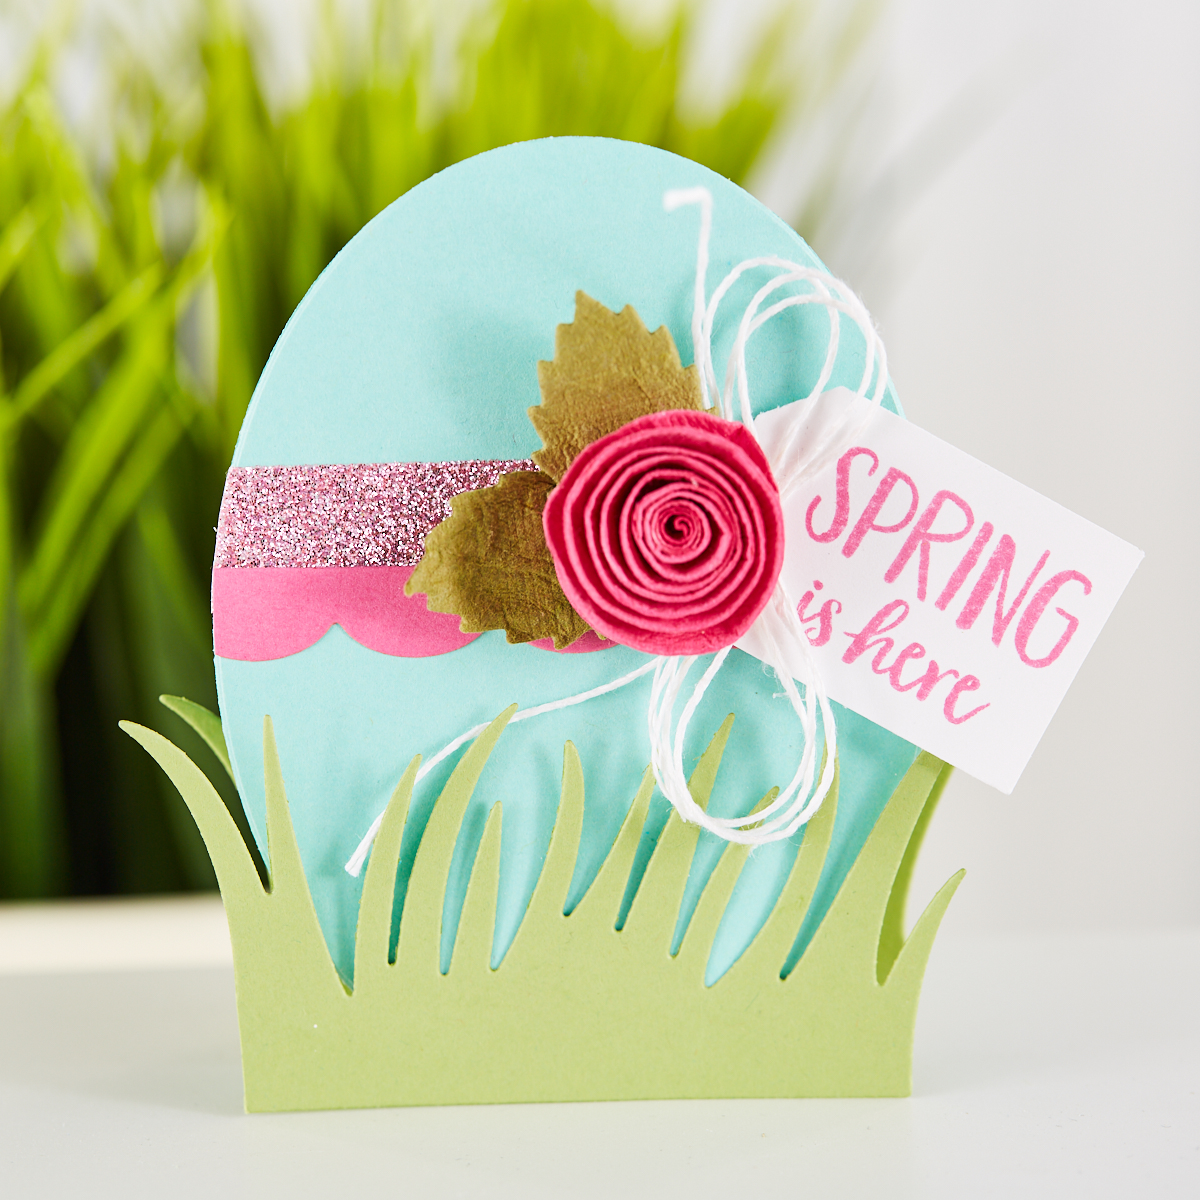 Spring Is Here handmade Easter egg shaped card idea with the Silly Goose Stamp Set from Spellbinders. Stop by this blog post to see 7 colorful Easter cards to inspire your springtime crafting!